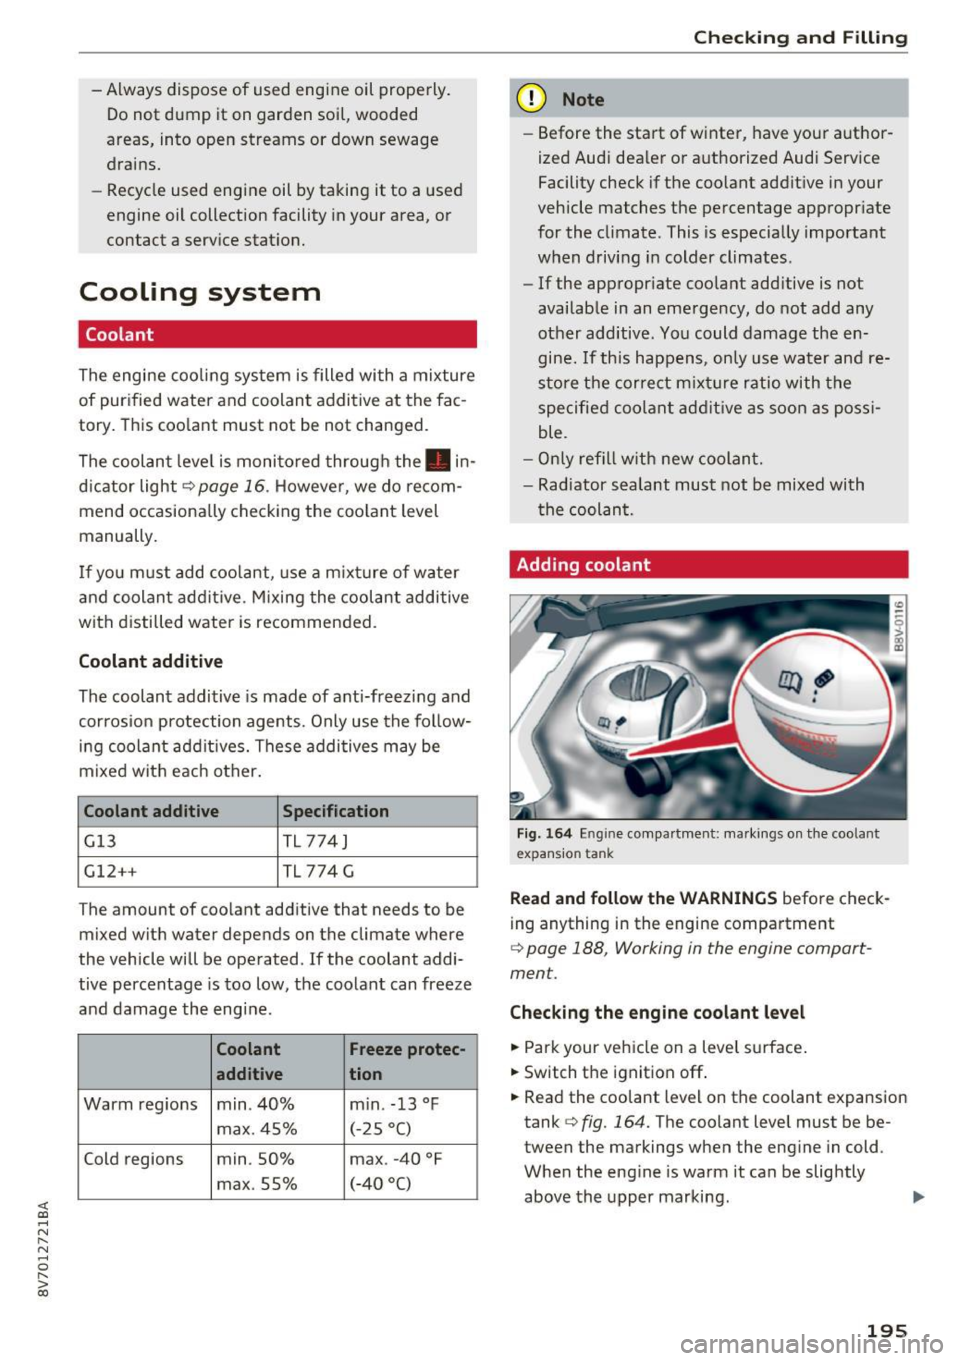 AUDI A3 CABRIOLET 2016  Owners Manual <( co ..... N 
" N ..... 0 r--. > 00 
-Always  dispose  of  used  engine  oil  prope rly . 
Do not  dump  it  on  garden  soi l, wooded 
areas,  into  open  streams  or  down  sewage 
drains. 
- Recyc